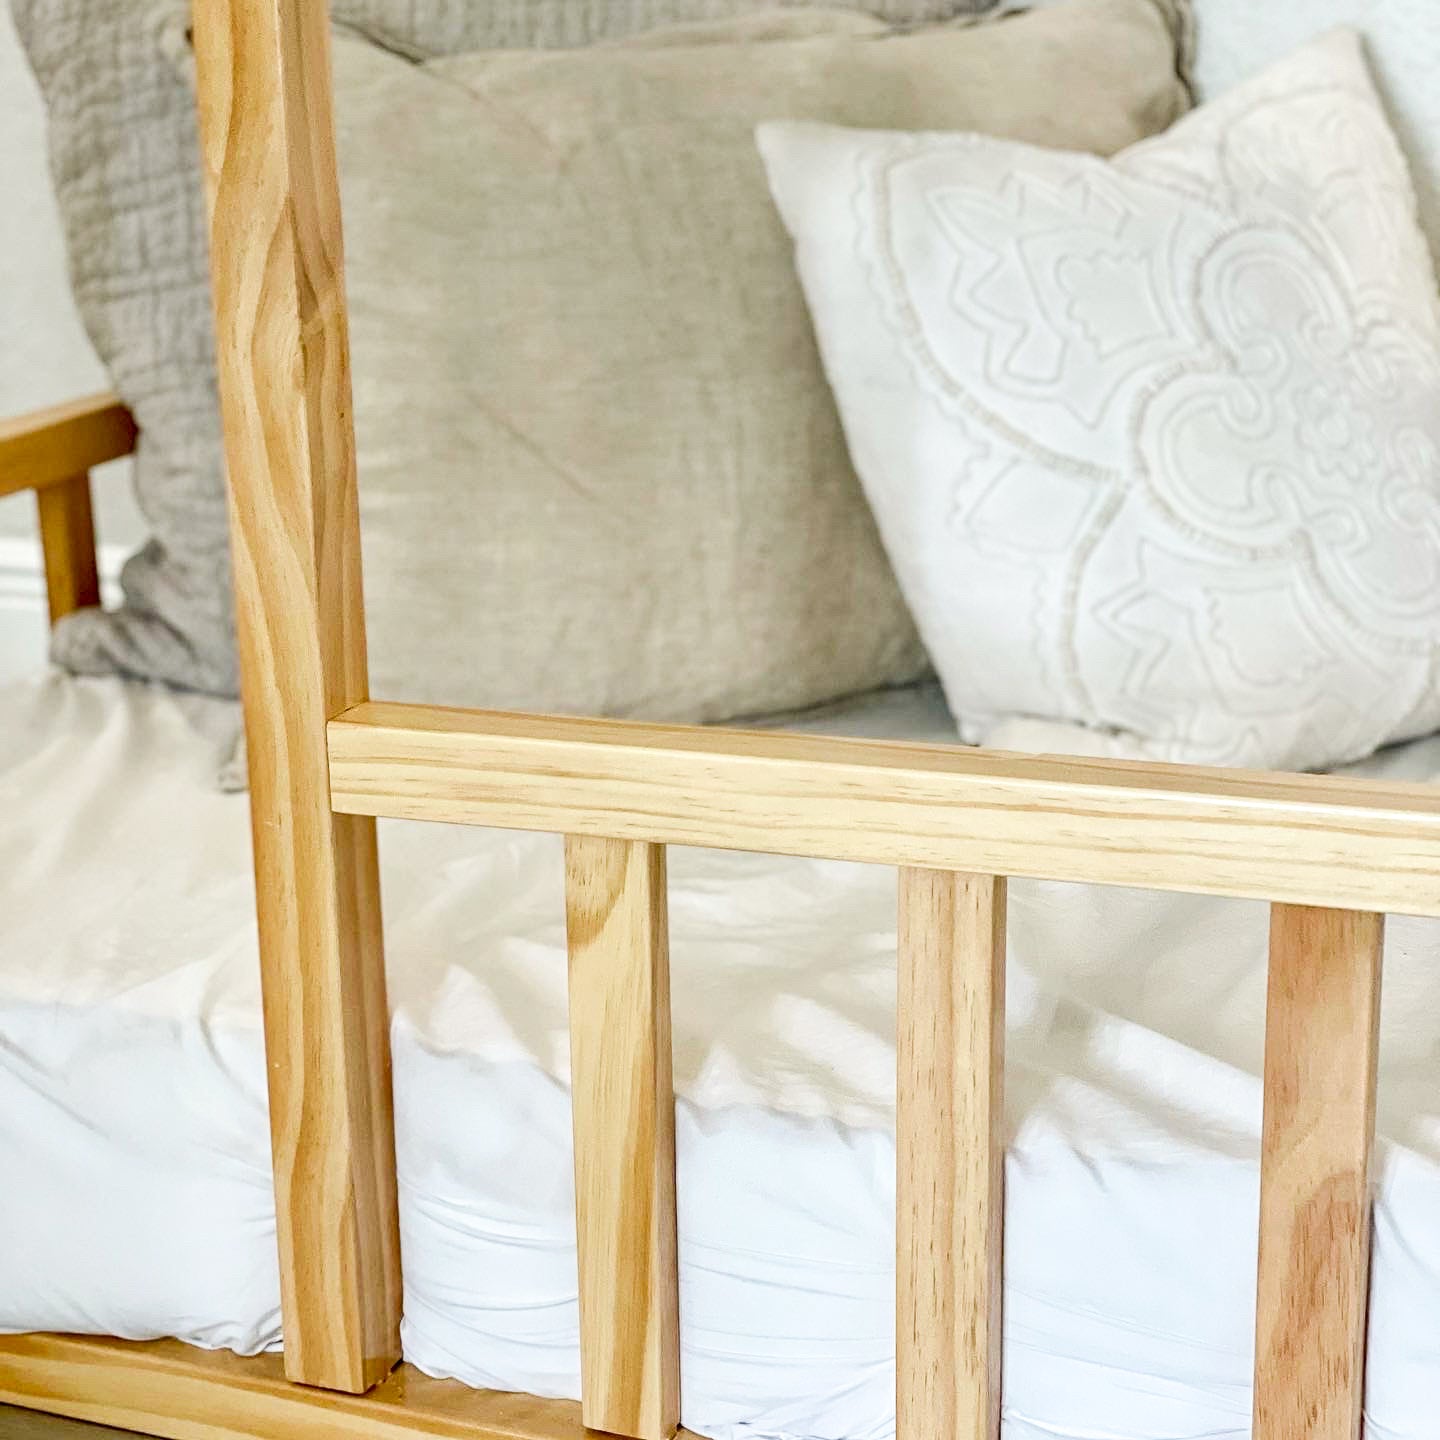 Montessori House Bed with Rails | 2MamaBees